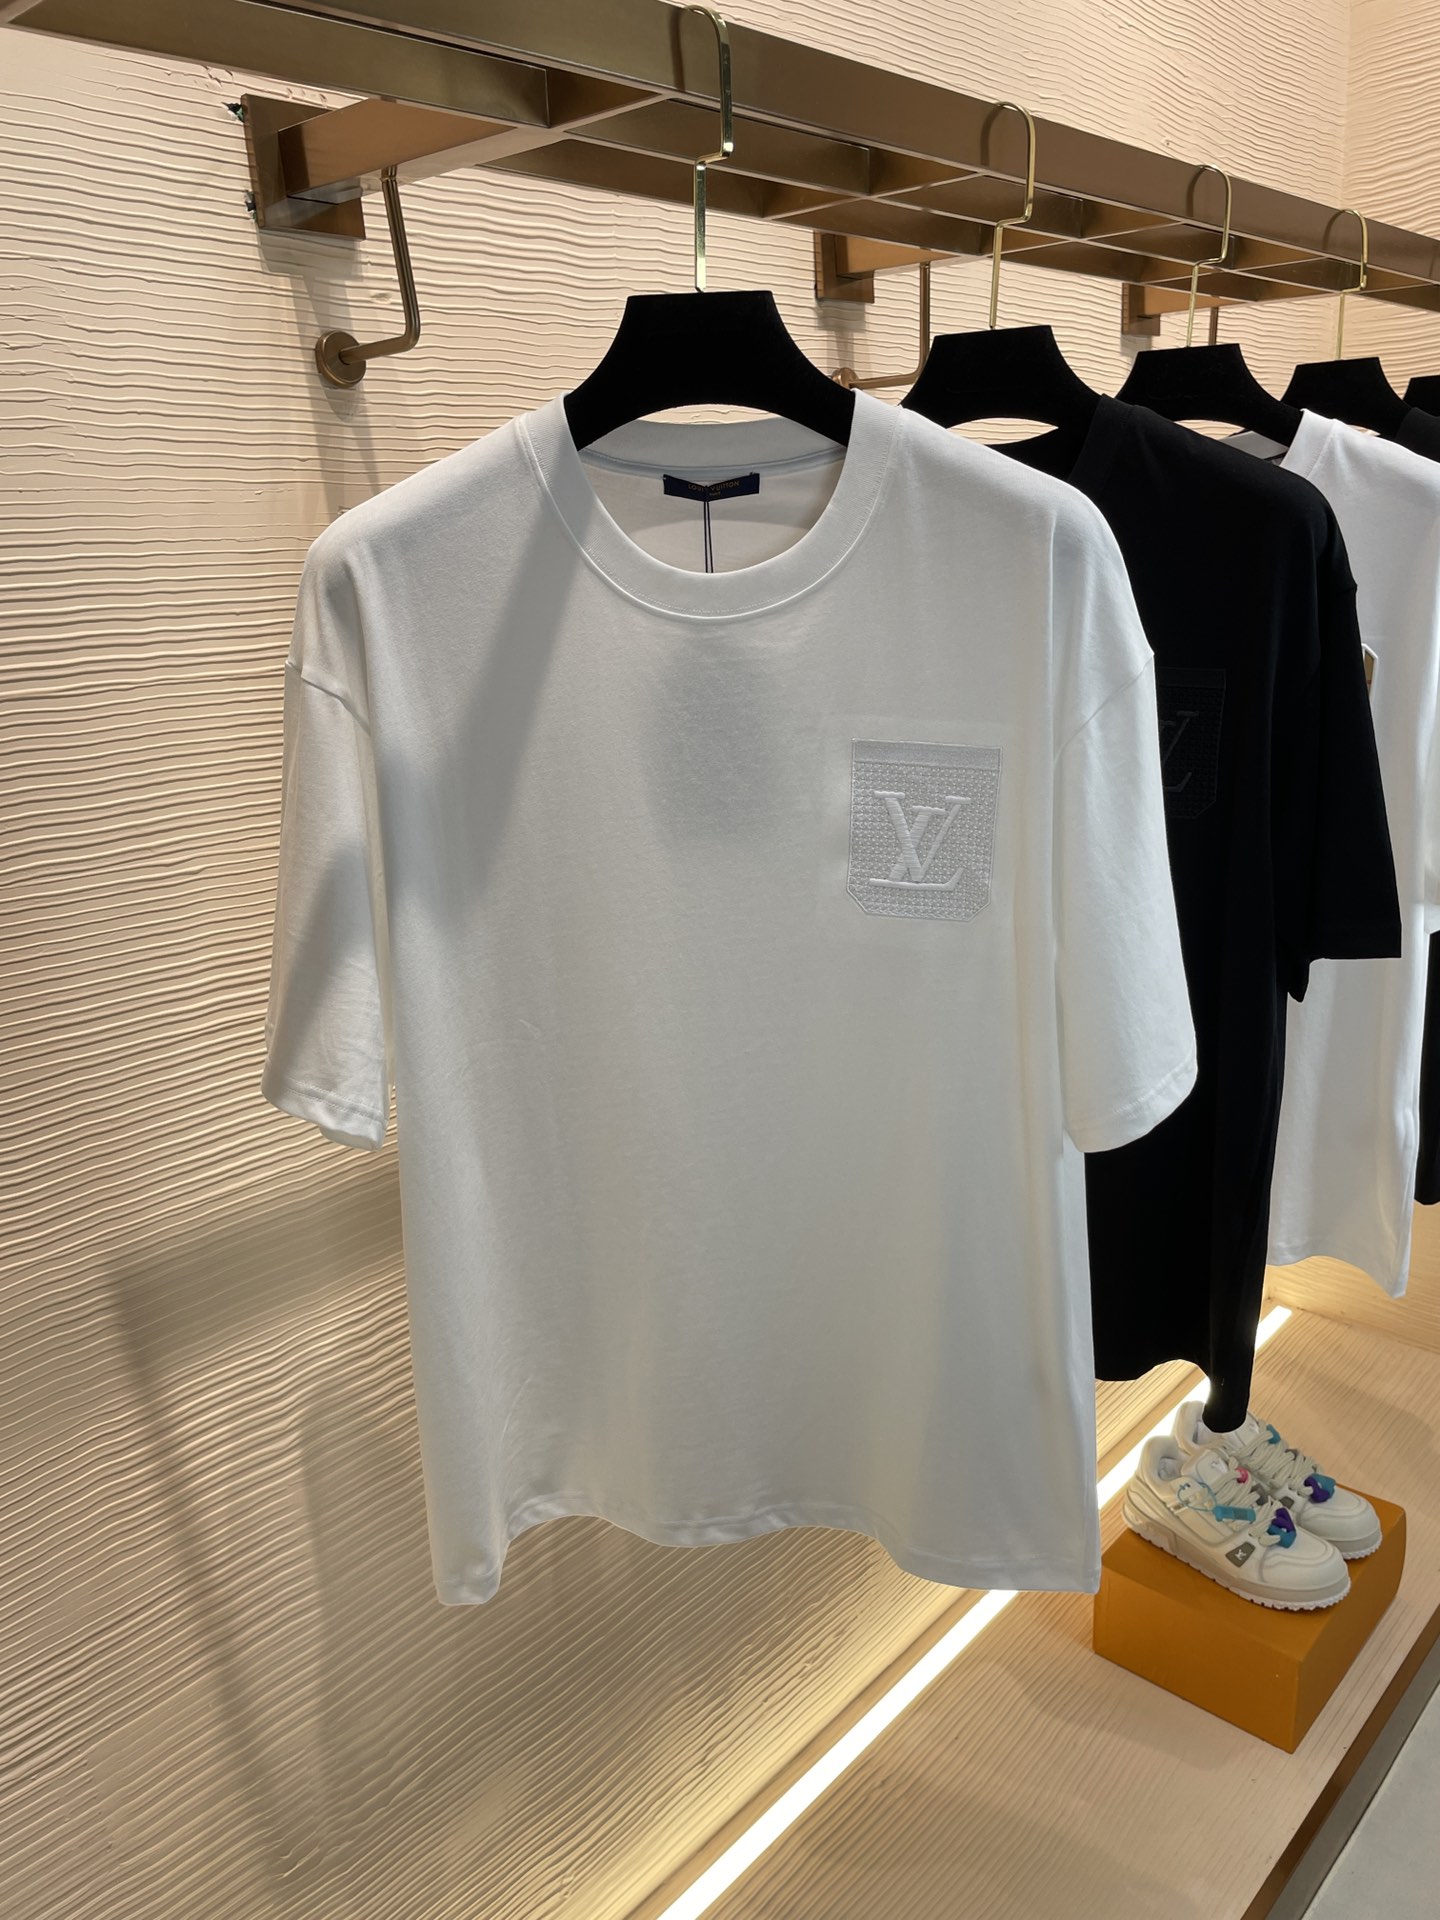 Louis Vuitton Clothing T-Shirt Black White Embroidery Cotton Summer Collection Short Sleeve